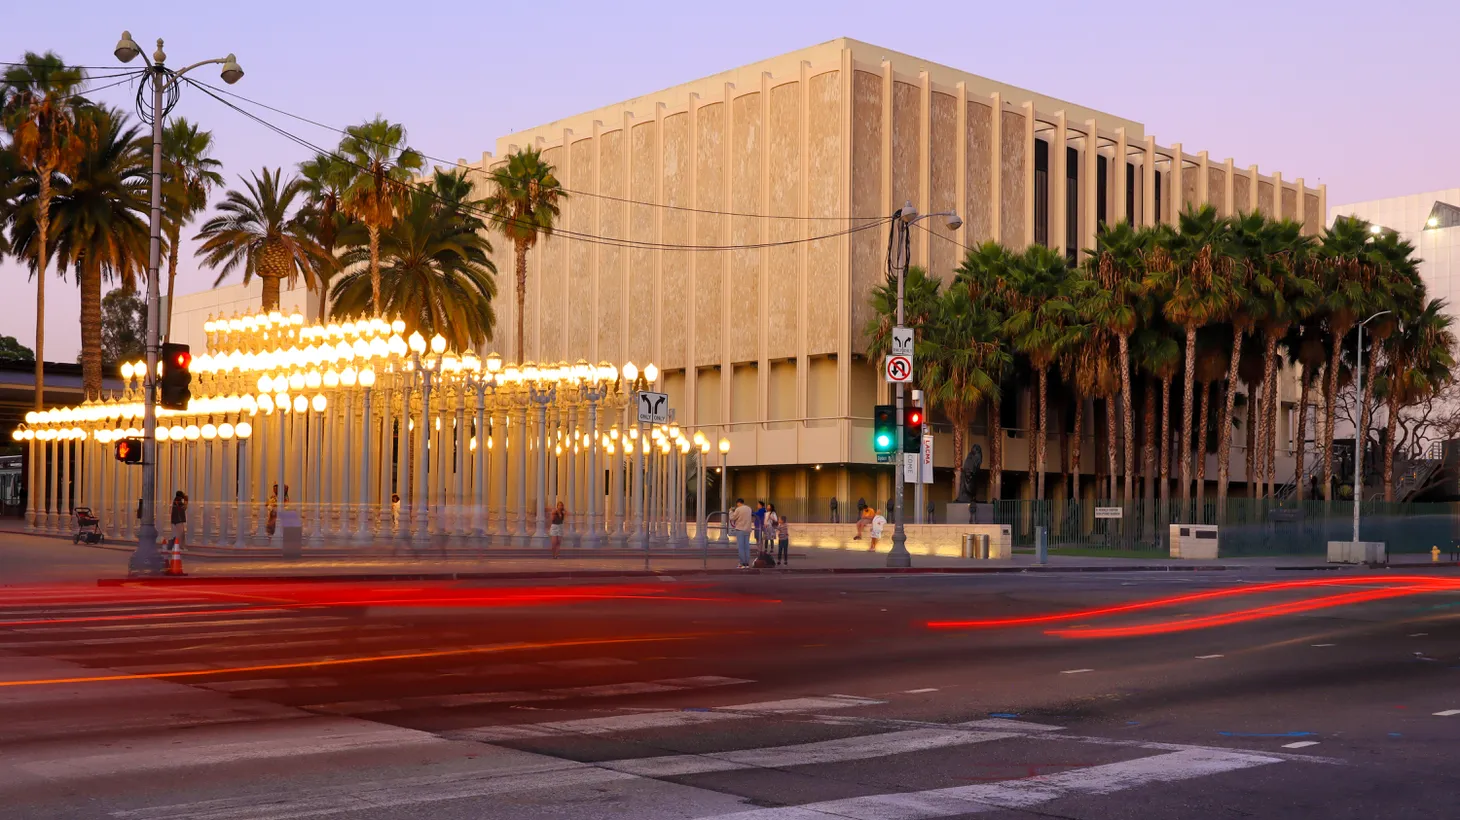 LACMA Director Michael Govan believes his museum’s new partnership with Las Vegas will motivate more people to donate art to LA County.